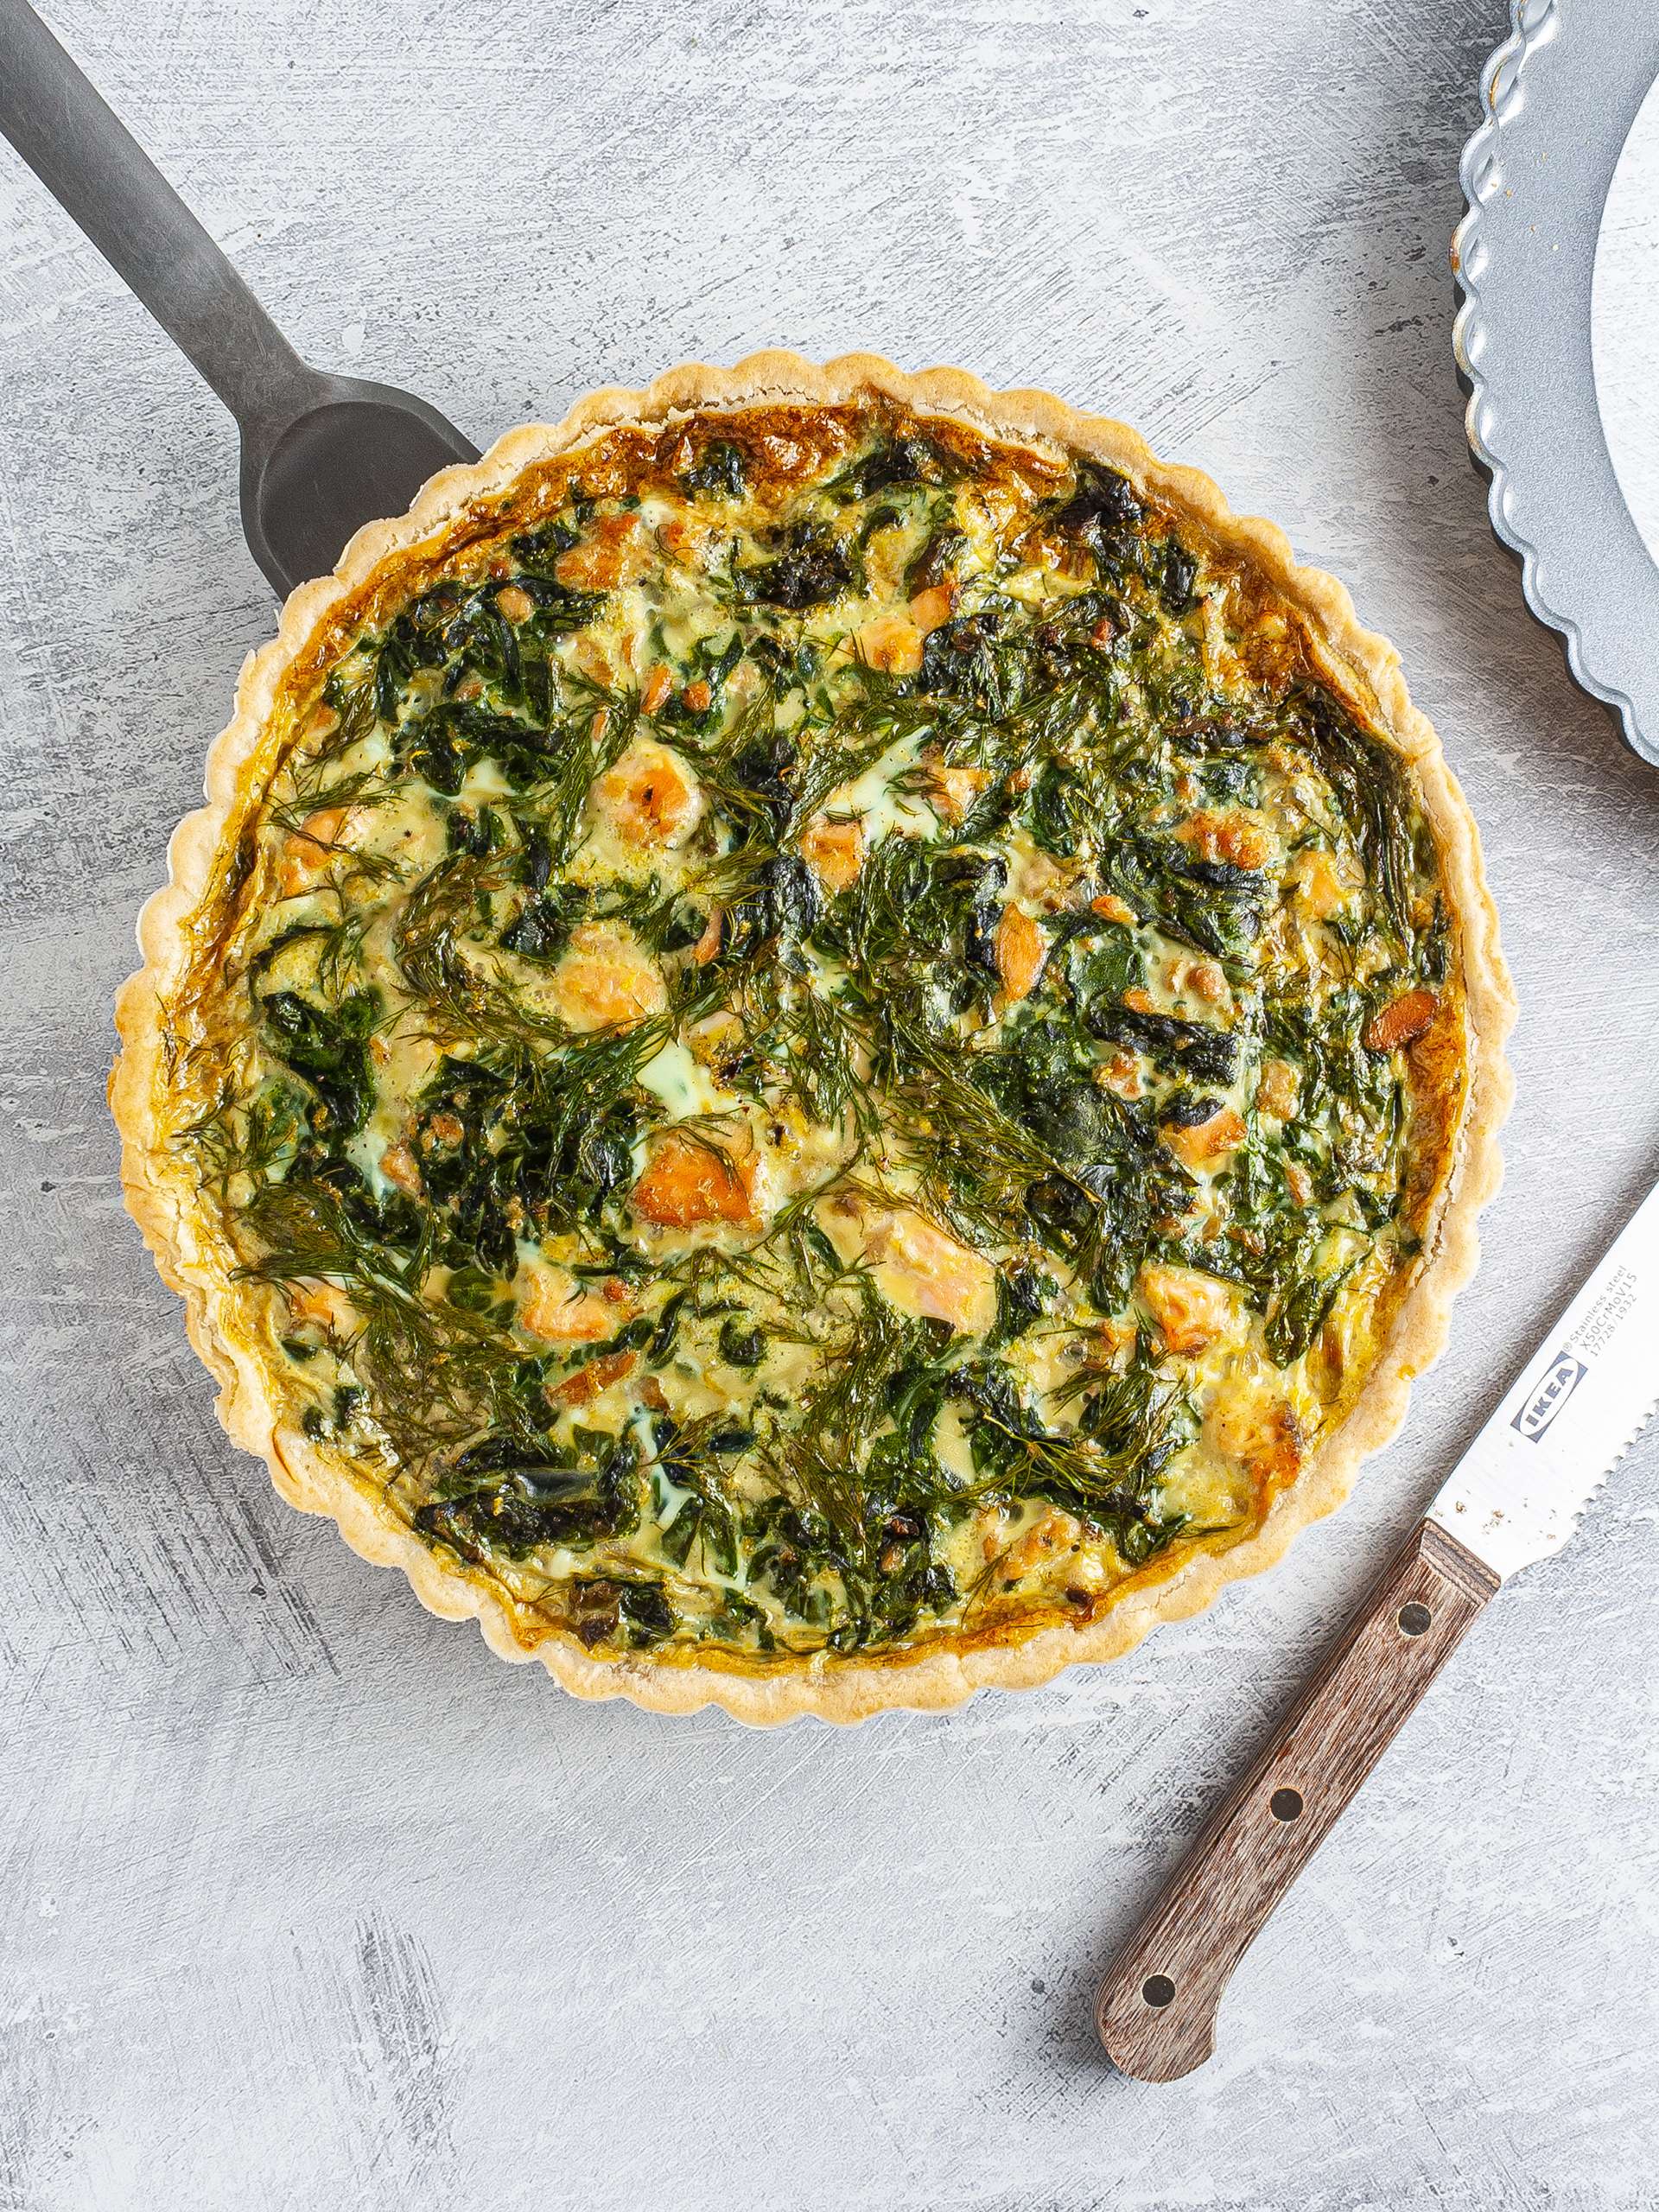 Baked salmon and spinach quiche